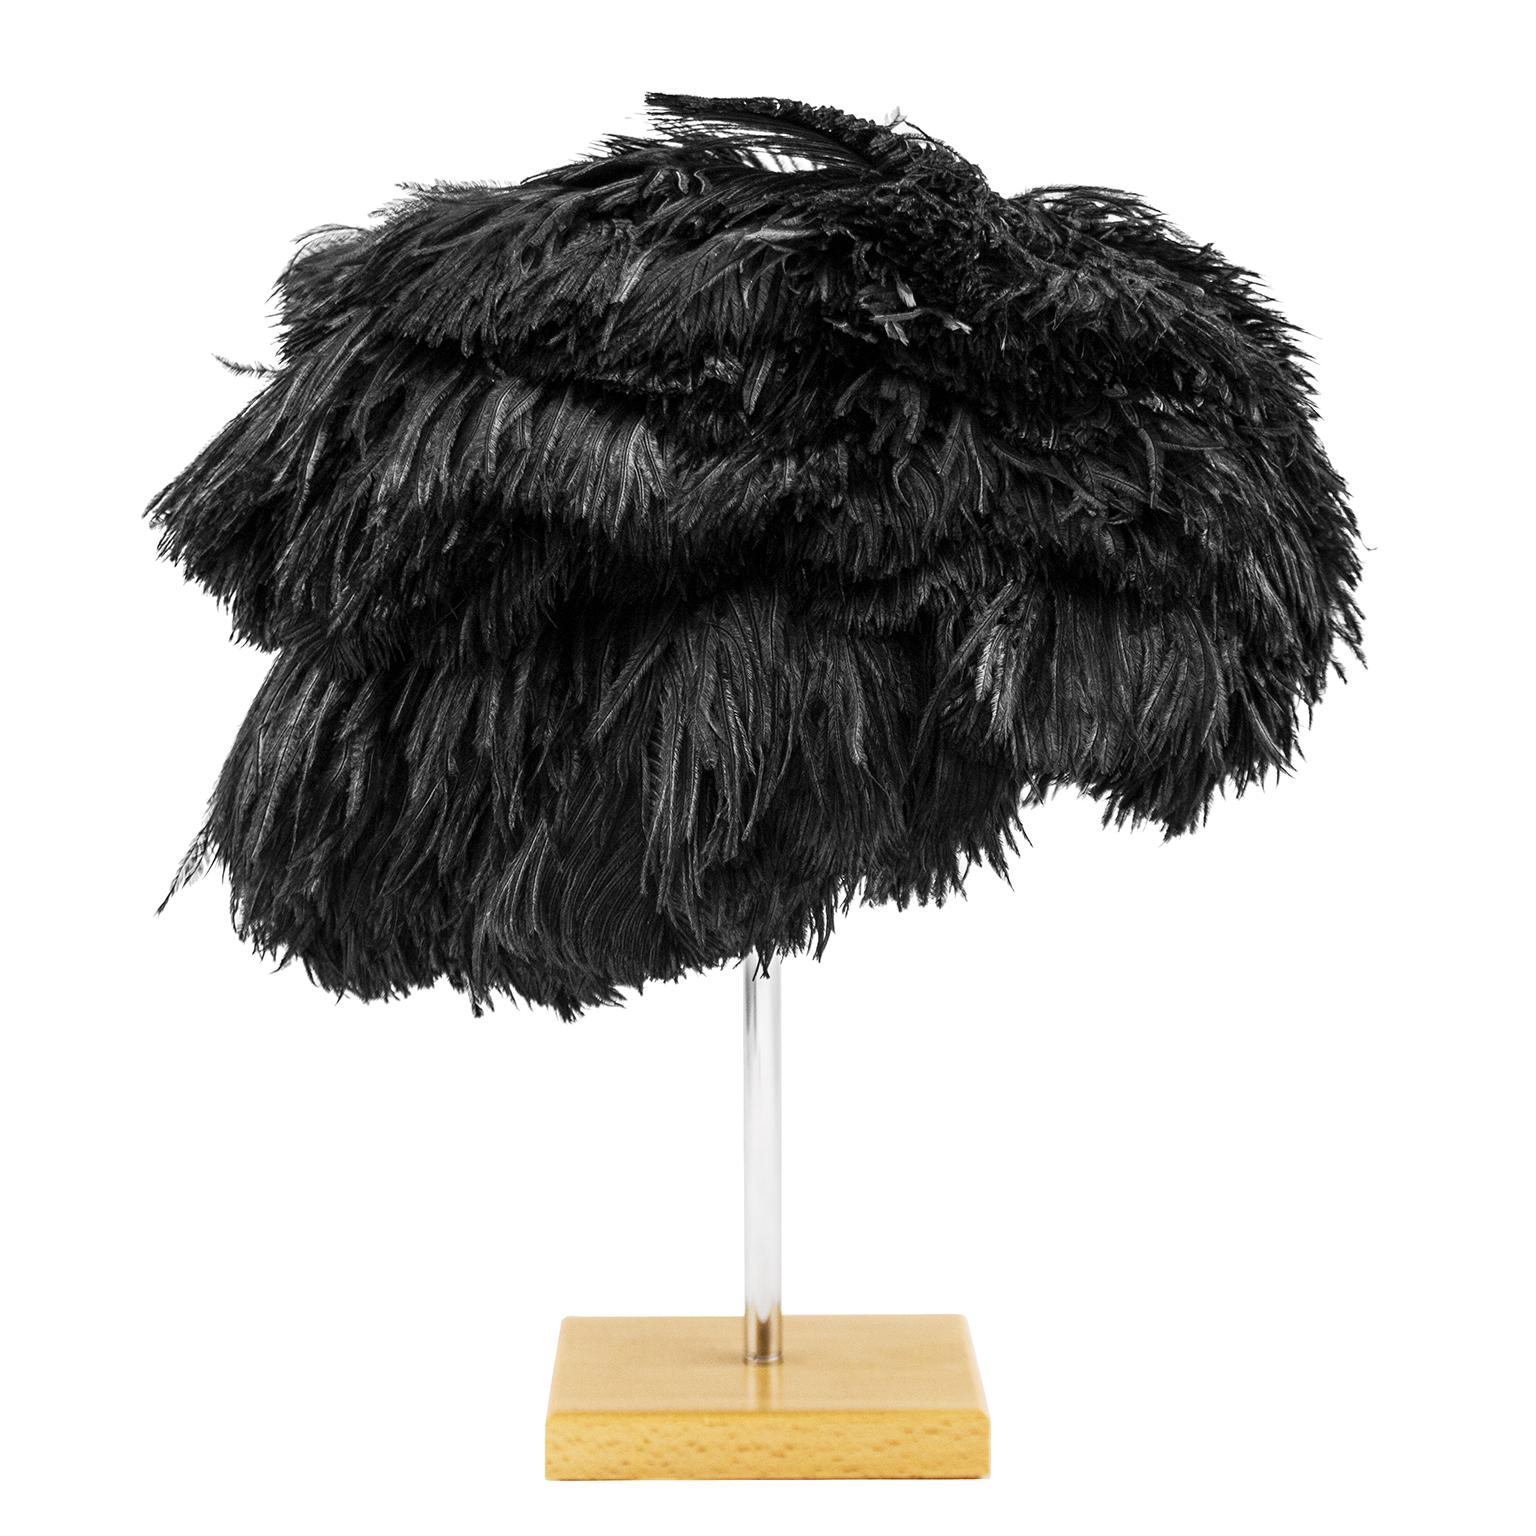 Light and fluttery while also dramatic, this beautiful hat designed by Yves Saint Laurent for Christian Dior-New York label from the 1950's is in immaculate condition. All the feather plumes are intact, the interior is clean and the comb is well